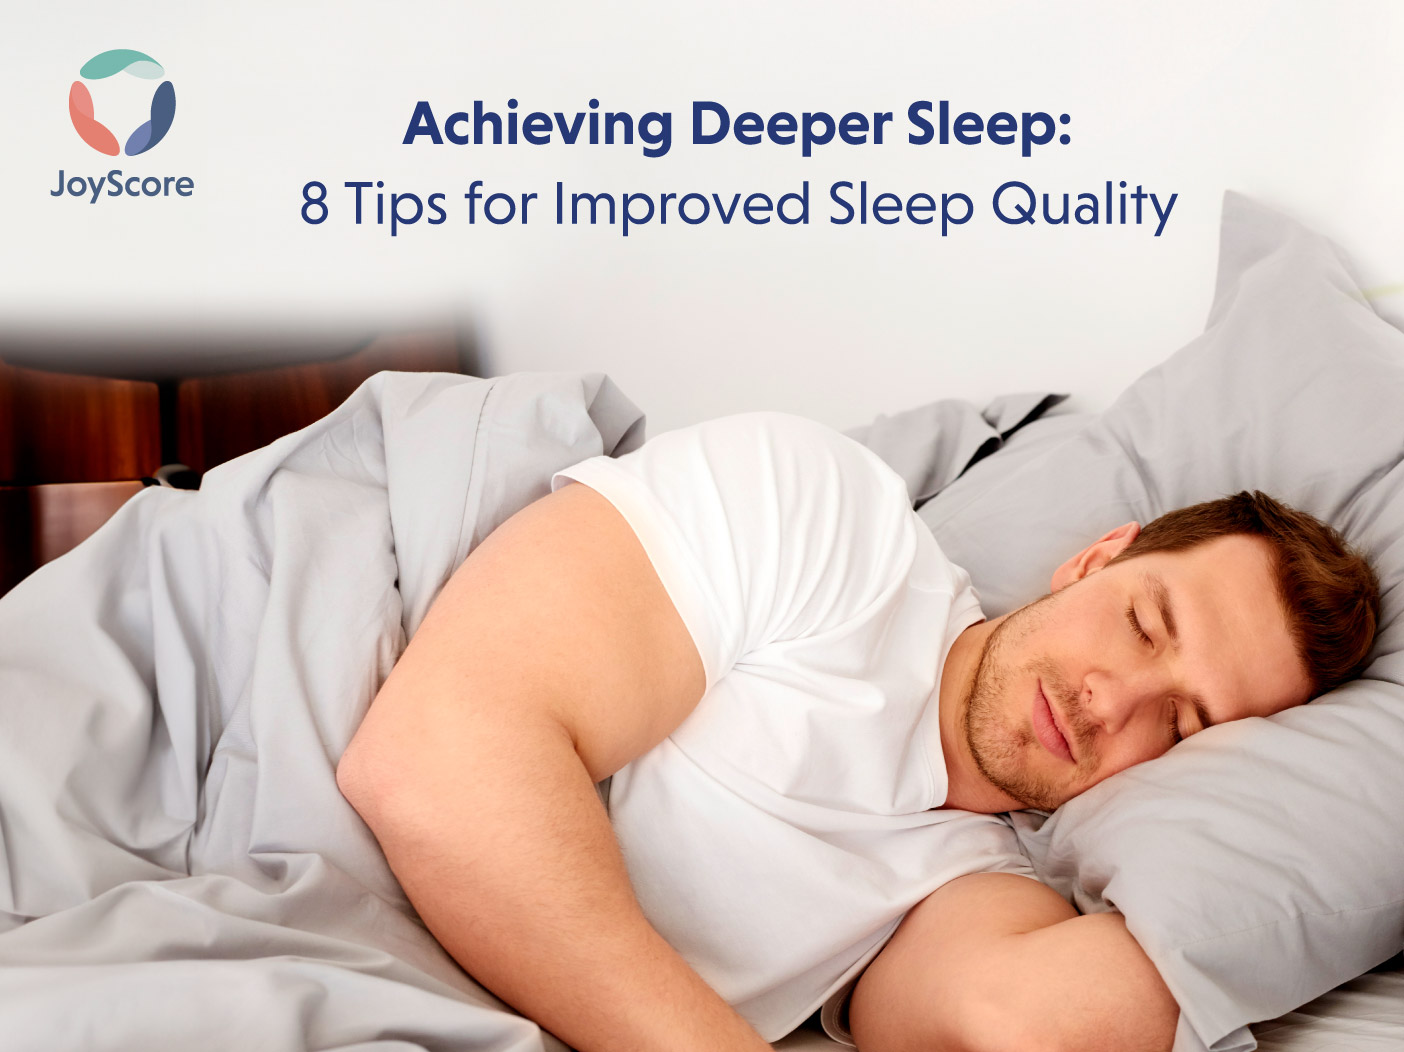 Achieving Deeper Sleep: 8 Practical Tips for Improved Sleep Quality